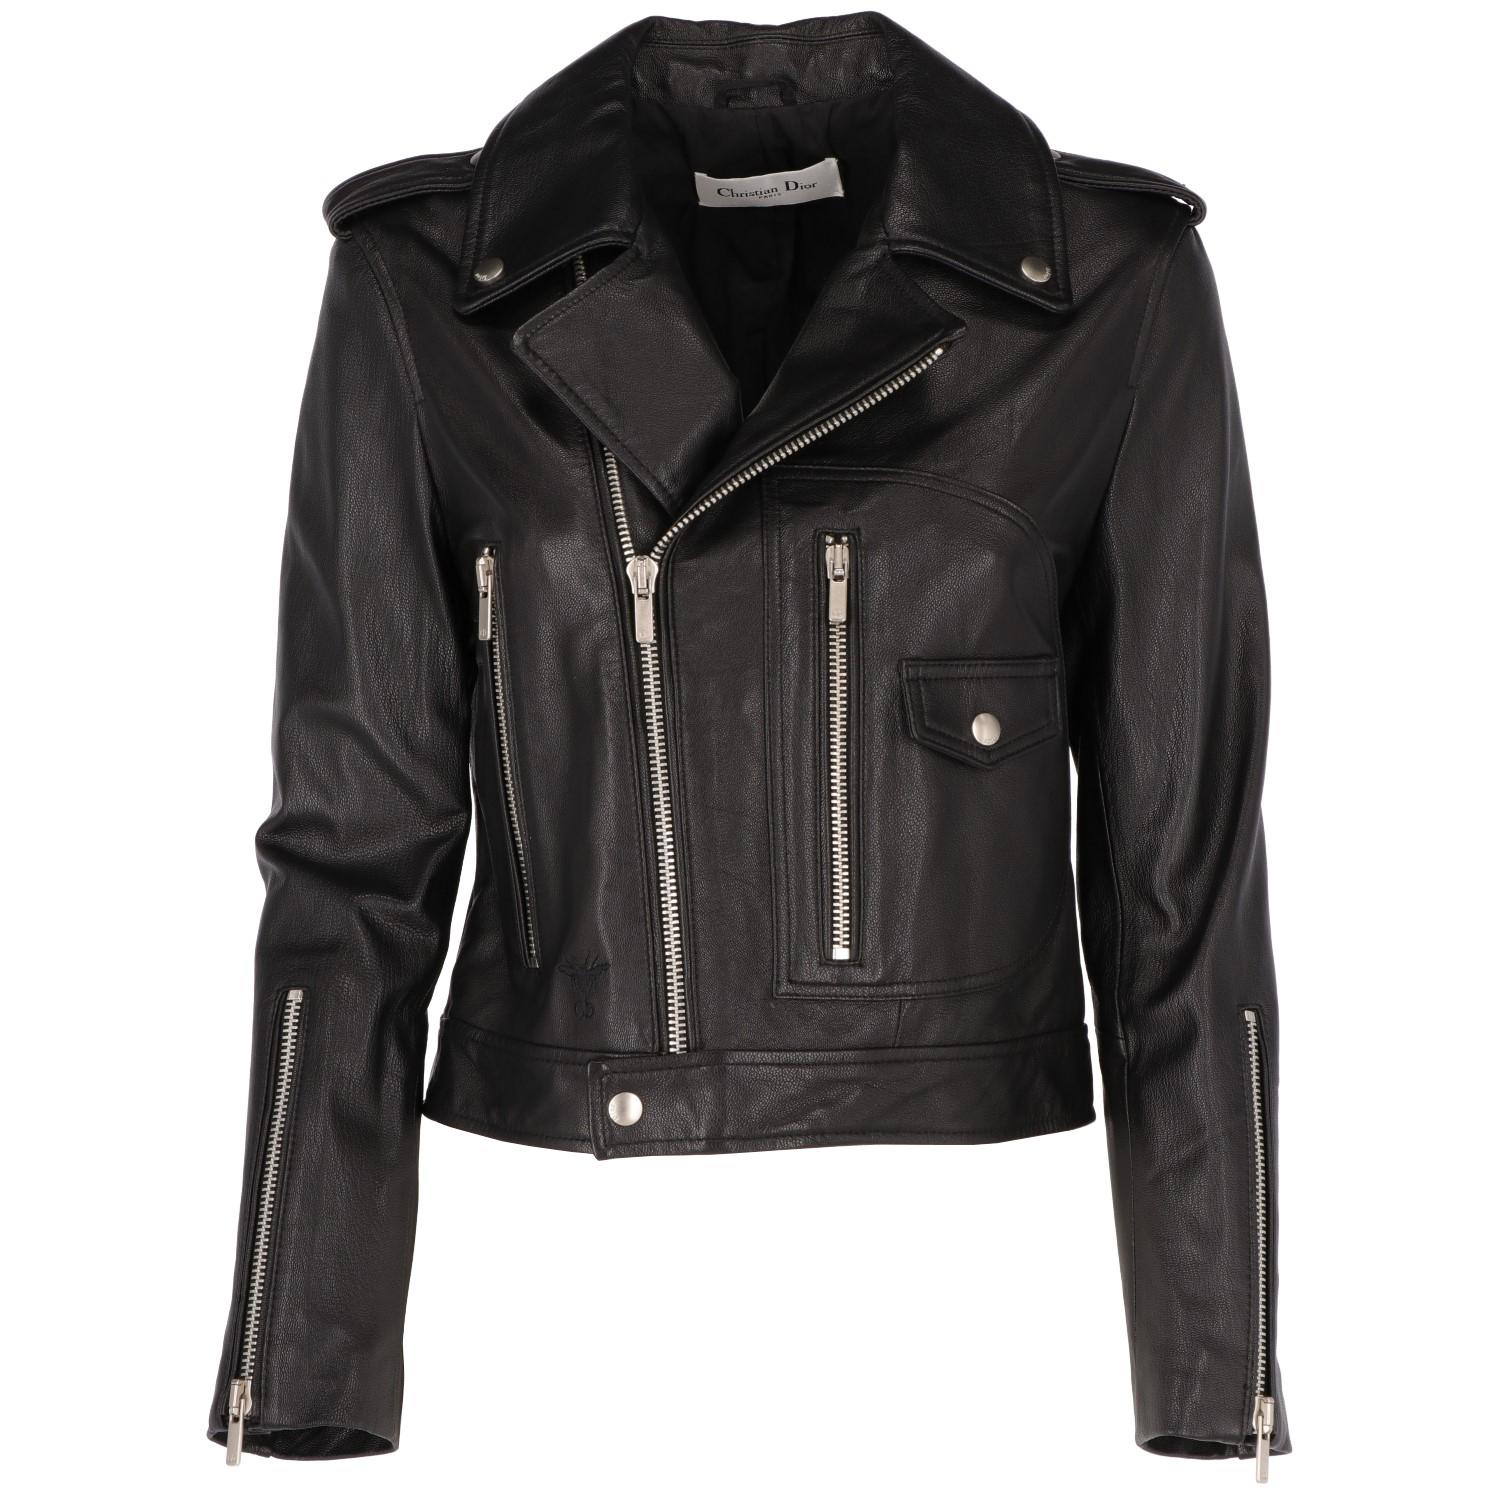 Christian Dior black leather biker jacket, 100% lamb leather with silk linings. Featuring press buttons with 